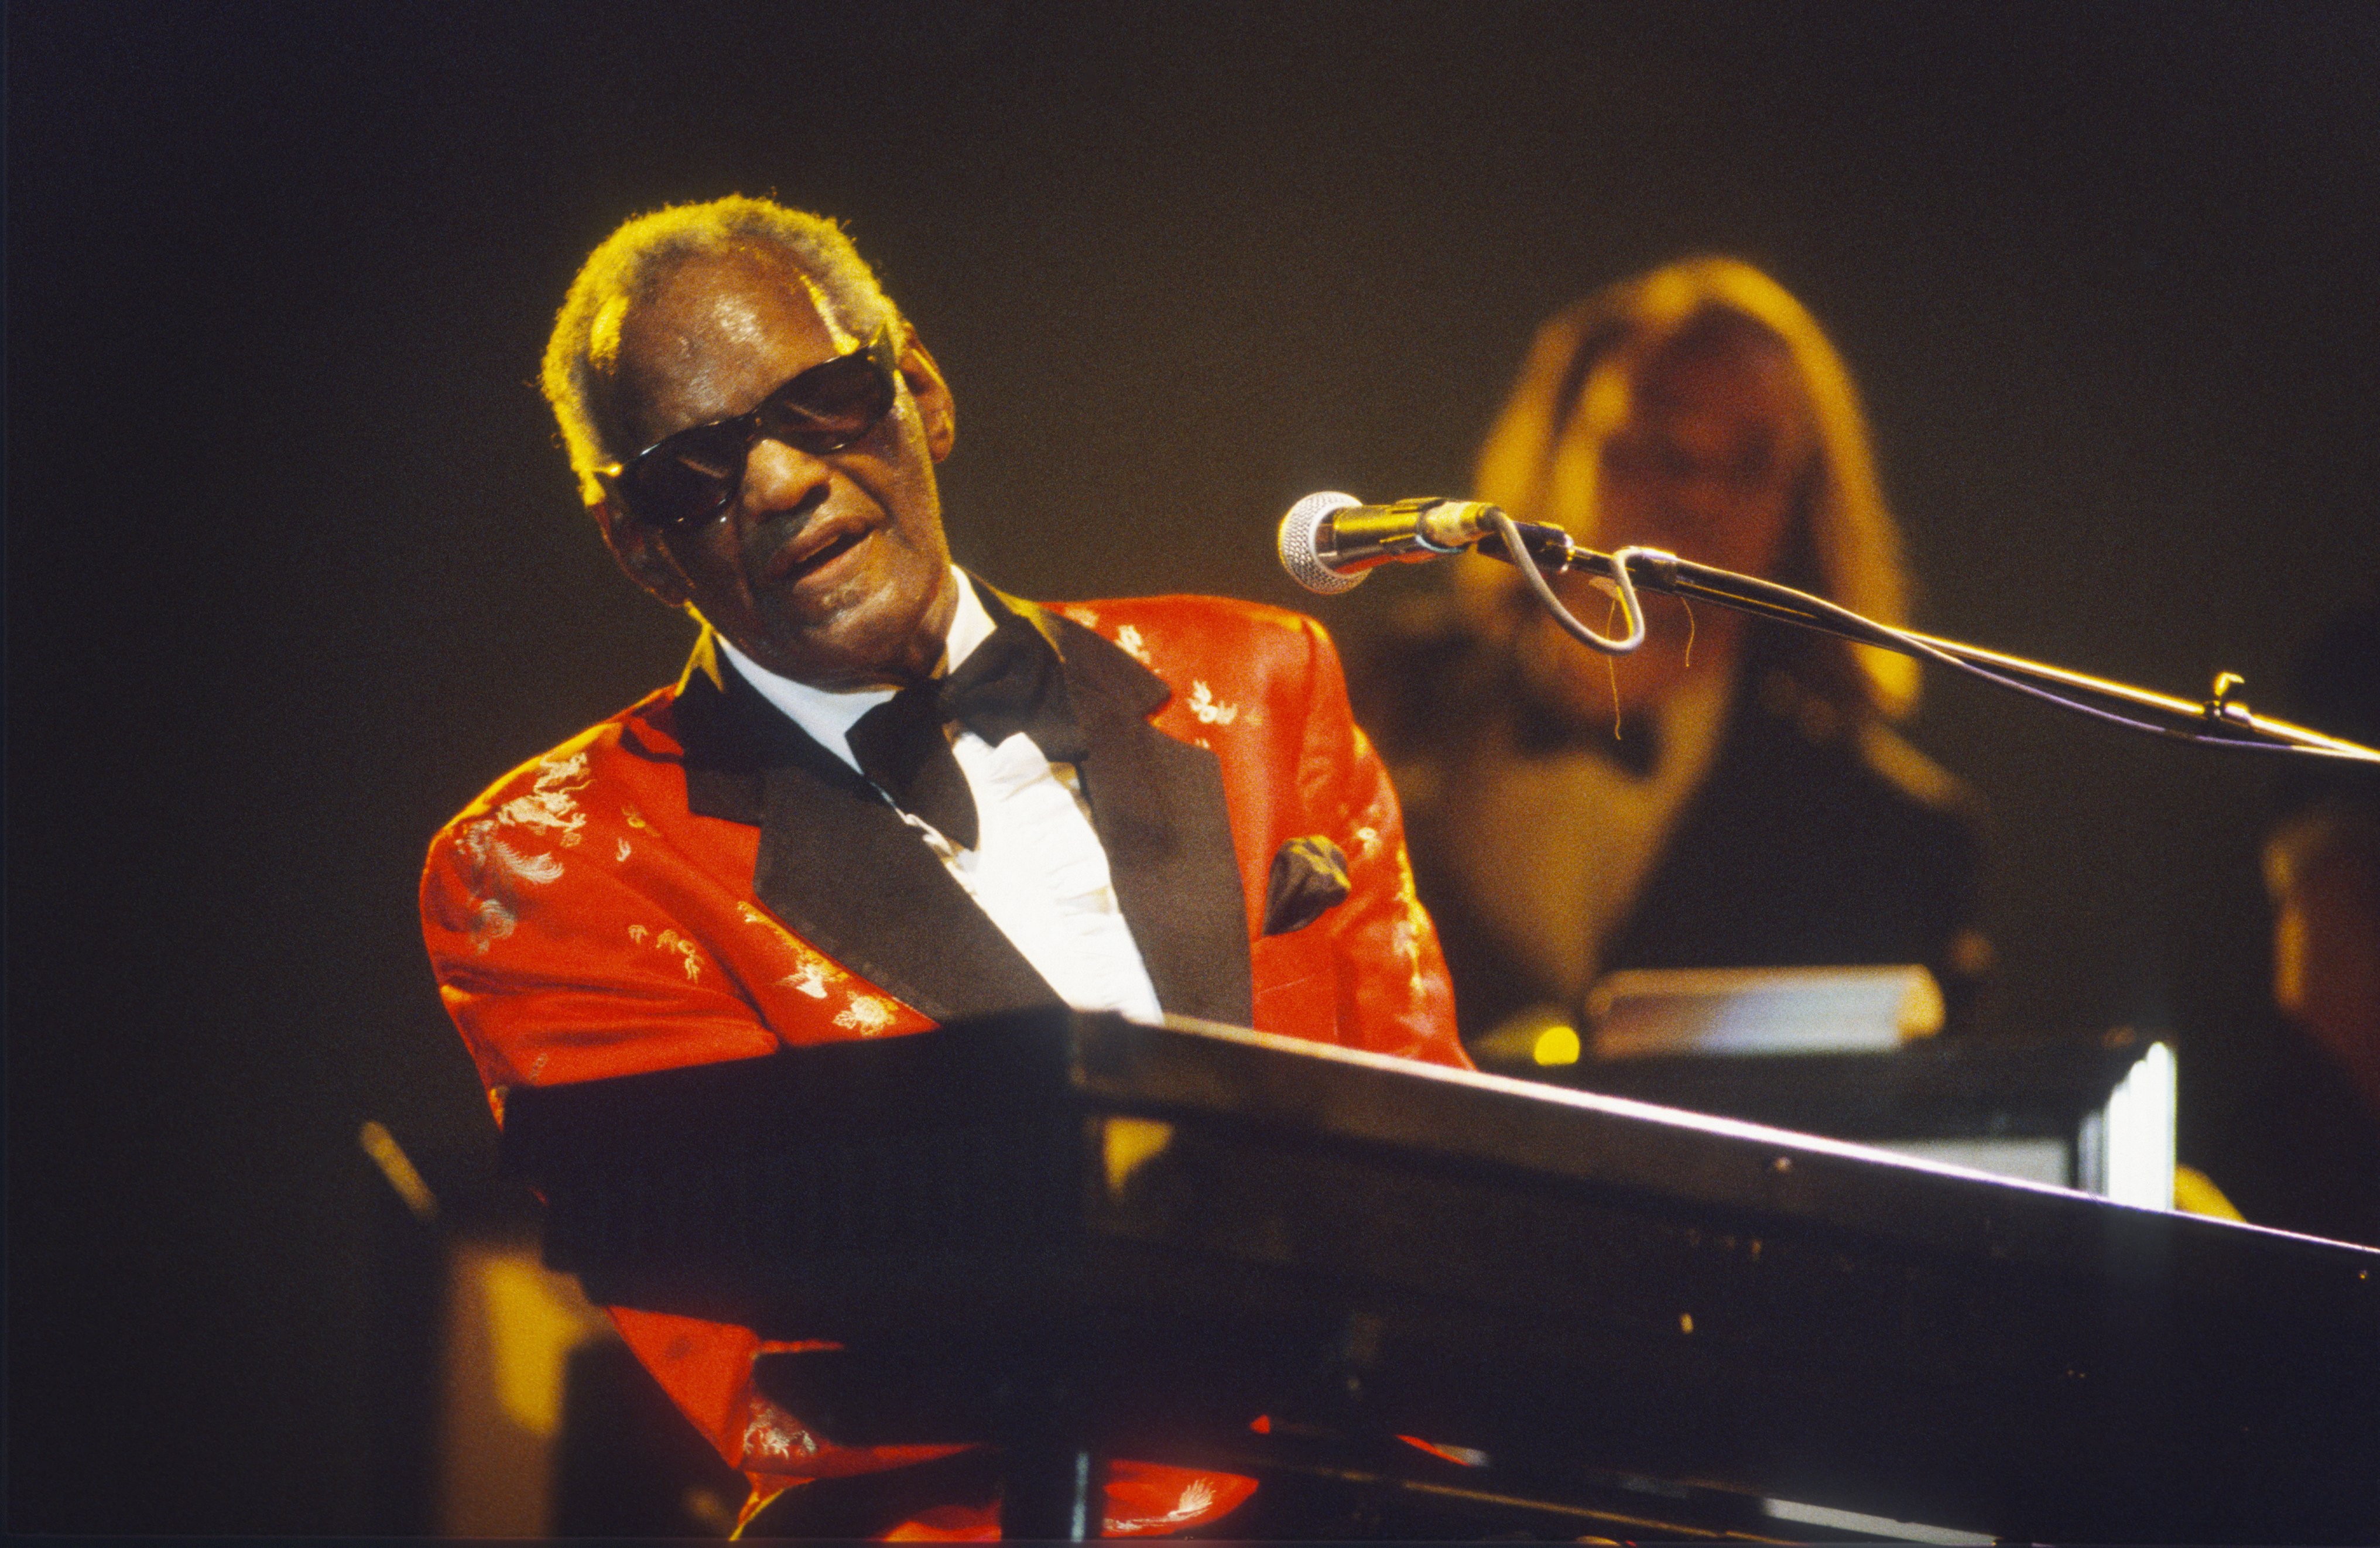 Ray Charles during the Rhythm 'n' Blues Festival at Peer, Belgium circa July 1994. | Source: Getty Images